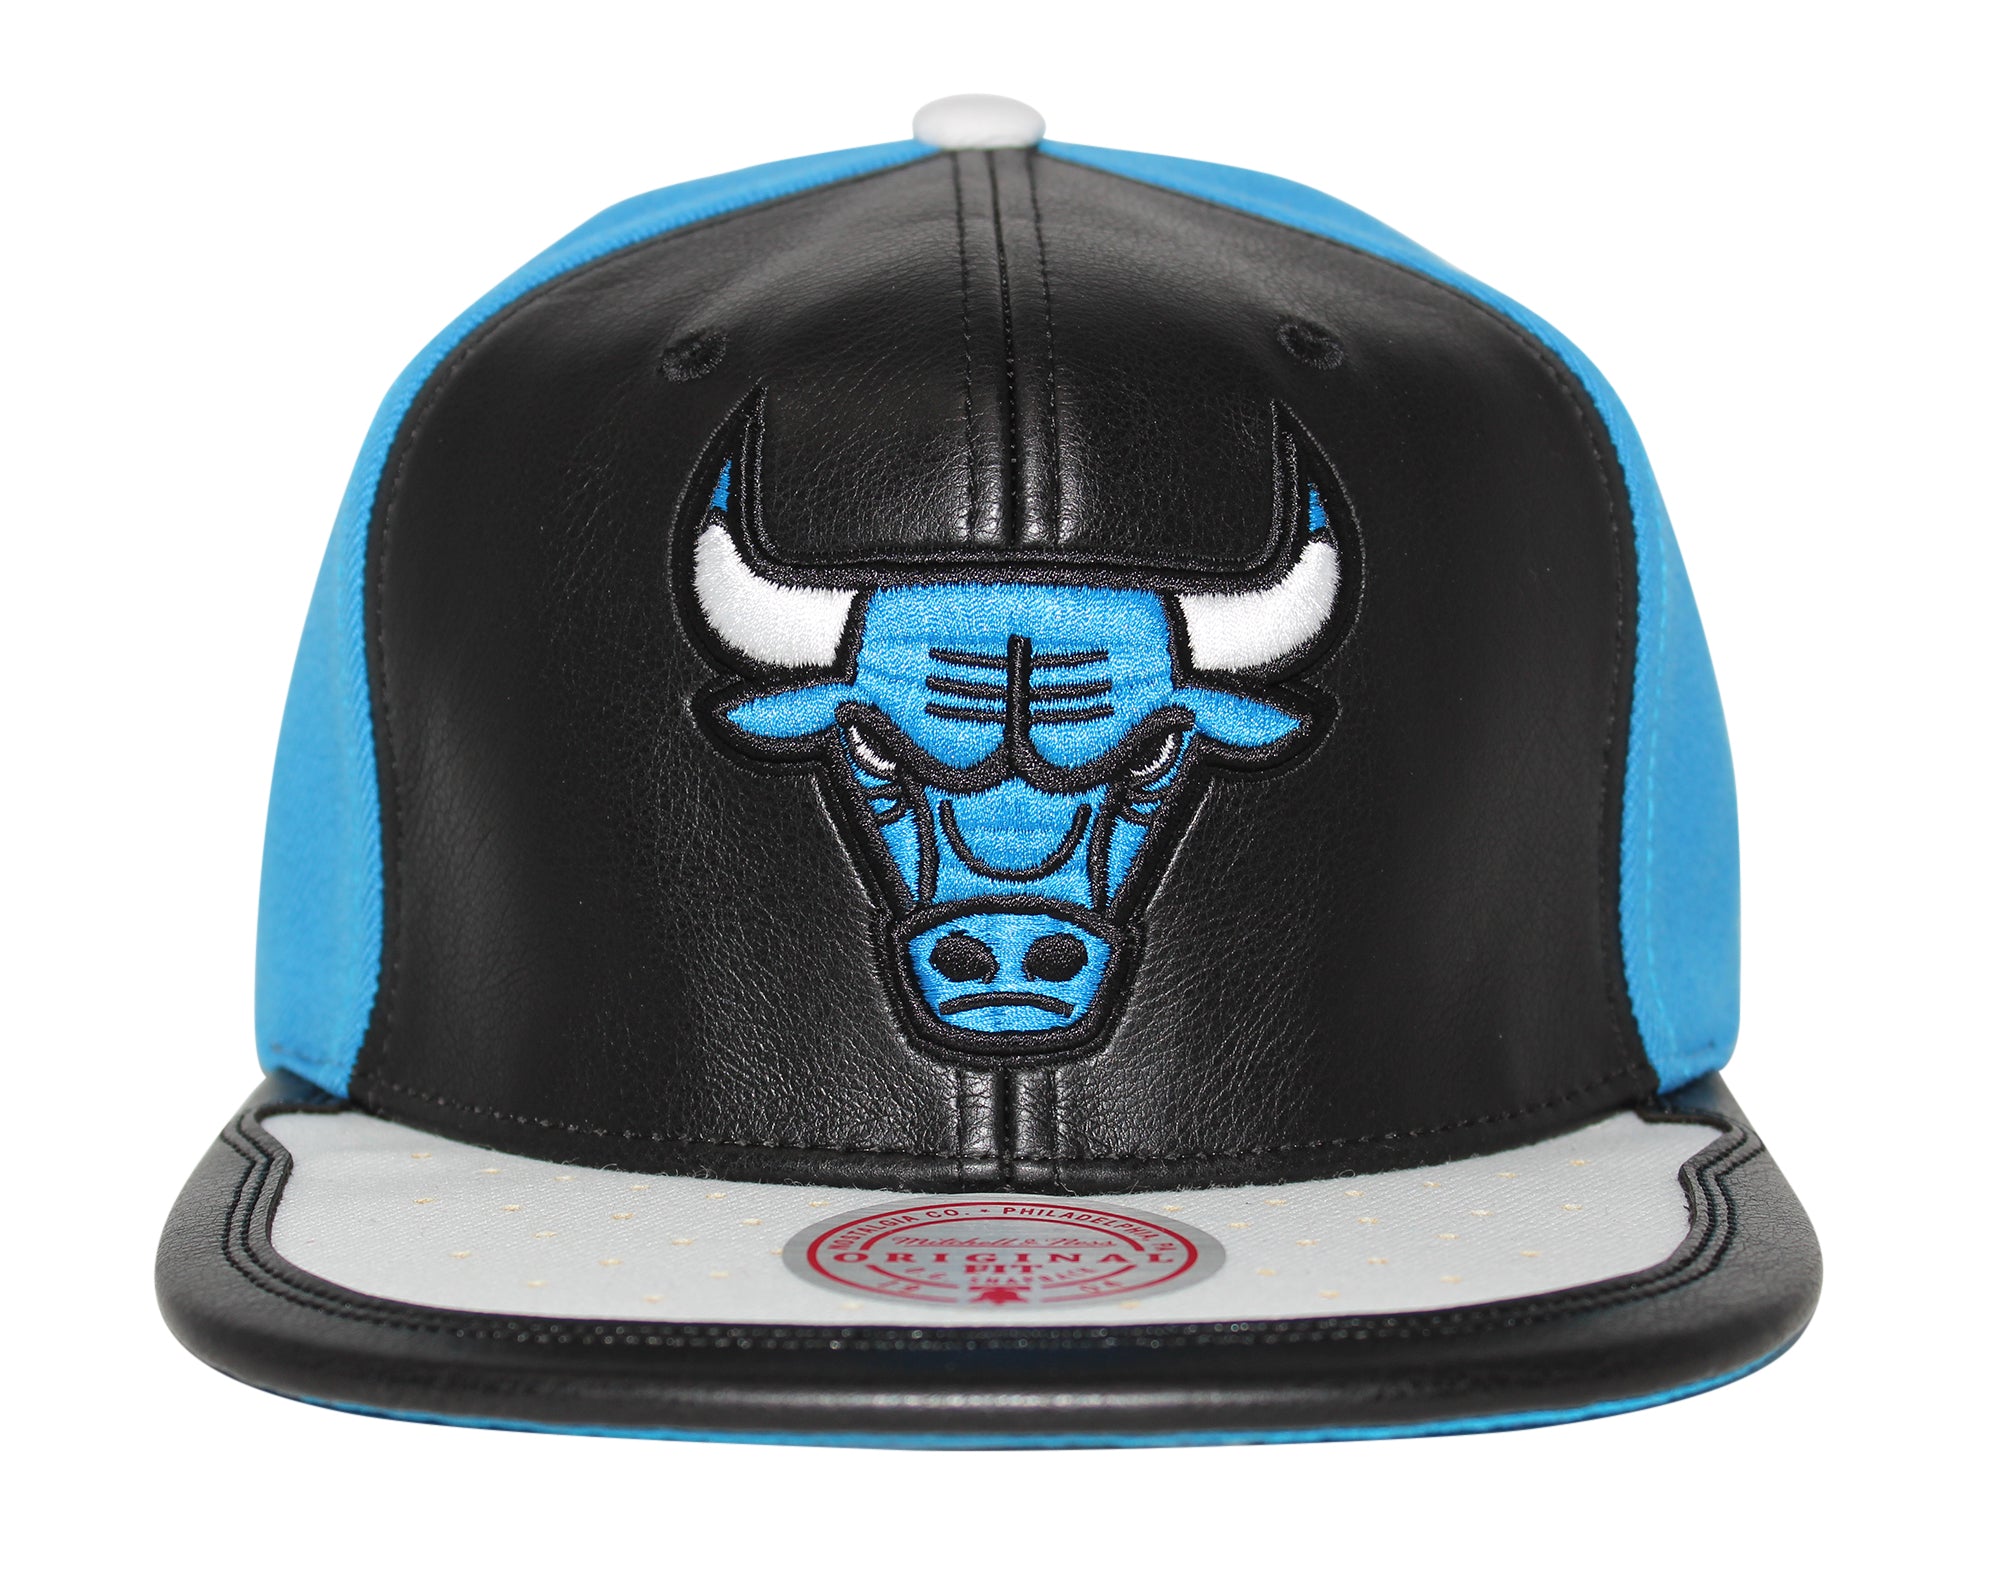 Day One Snap Bulls Cap by Mitchell & Ness